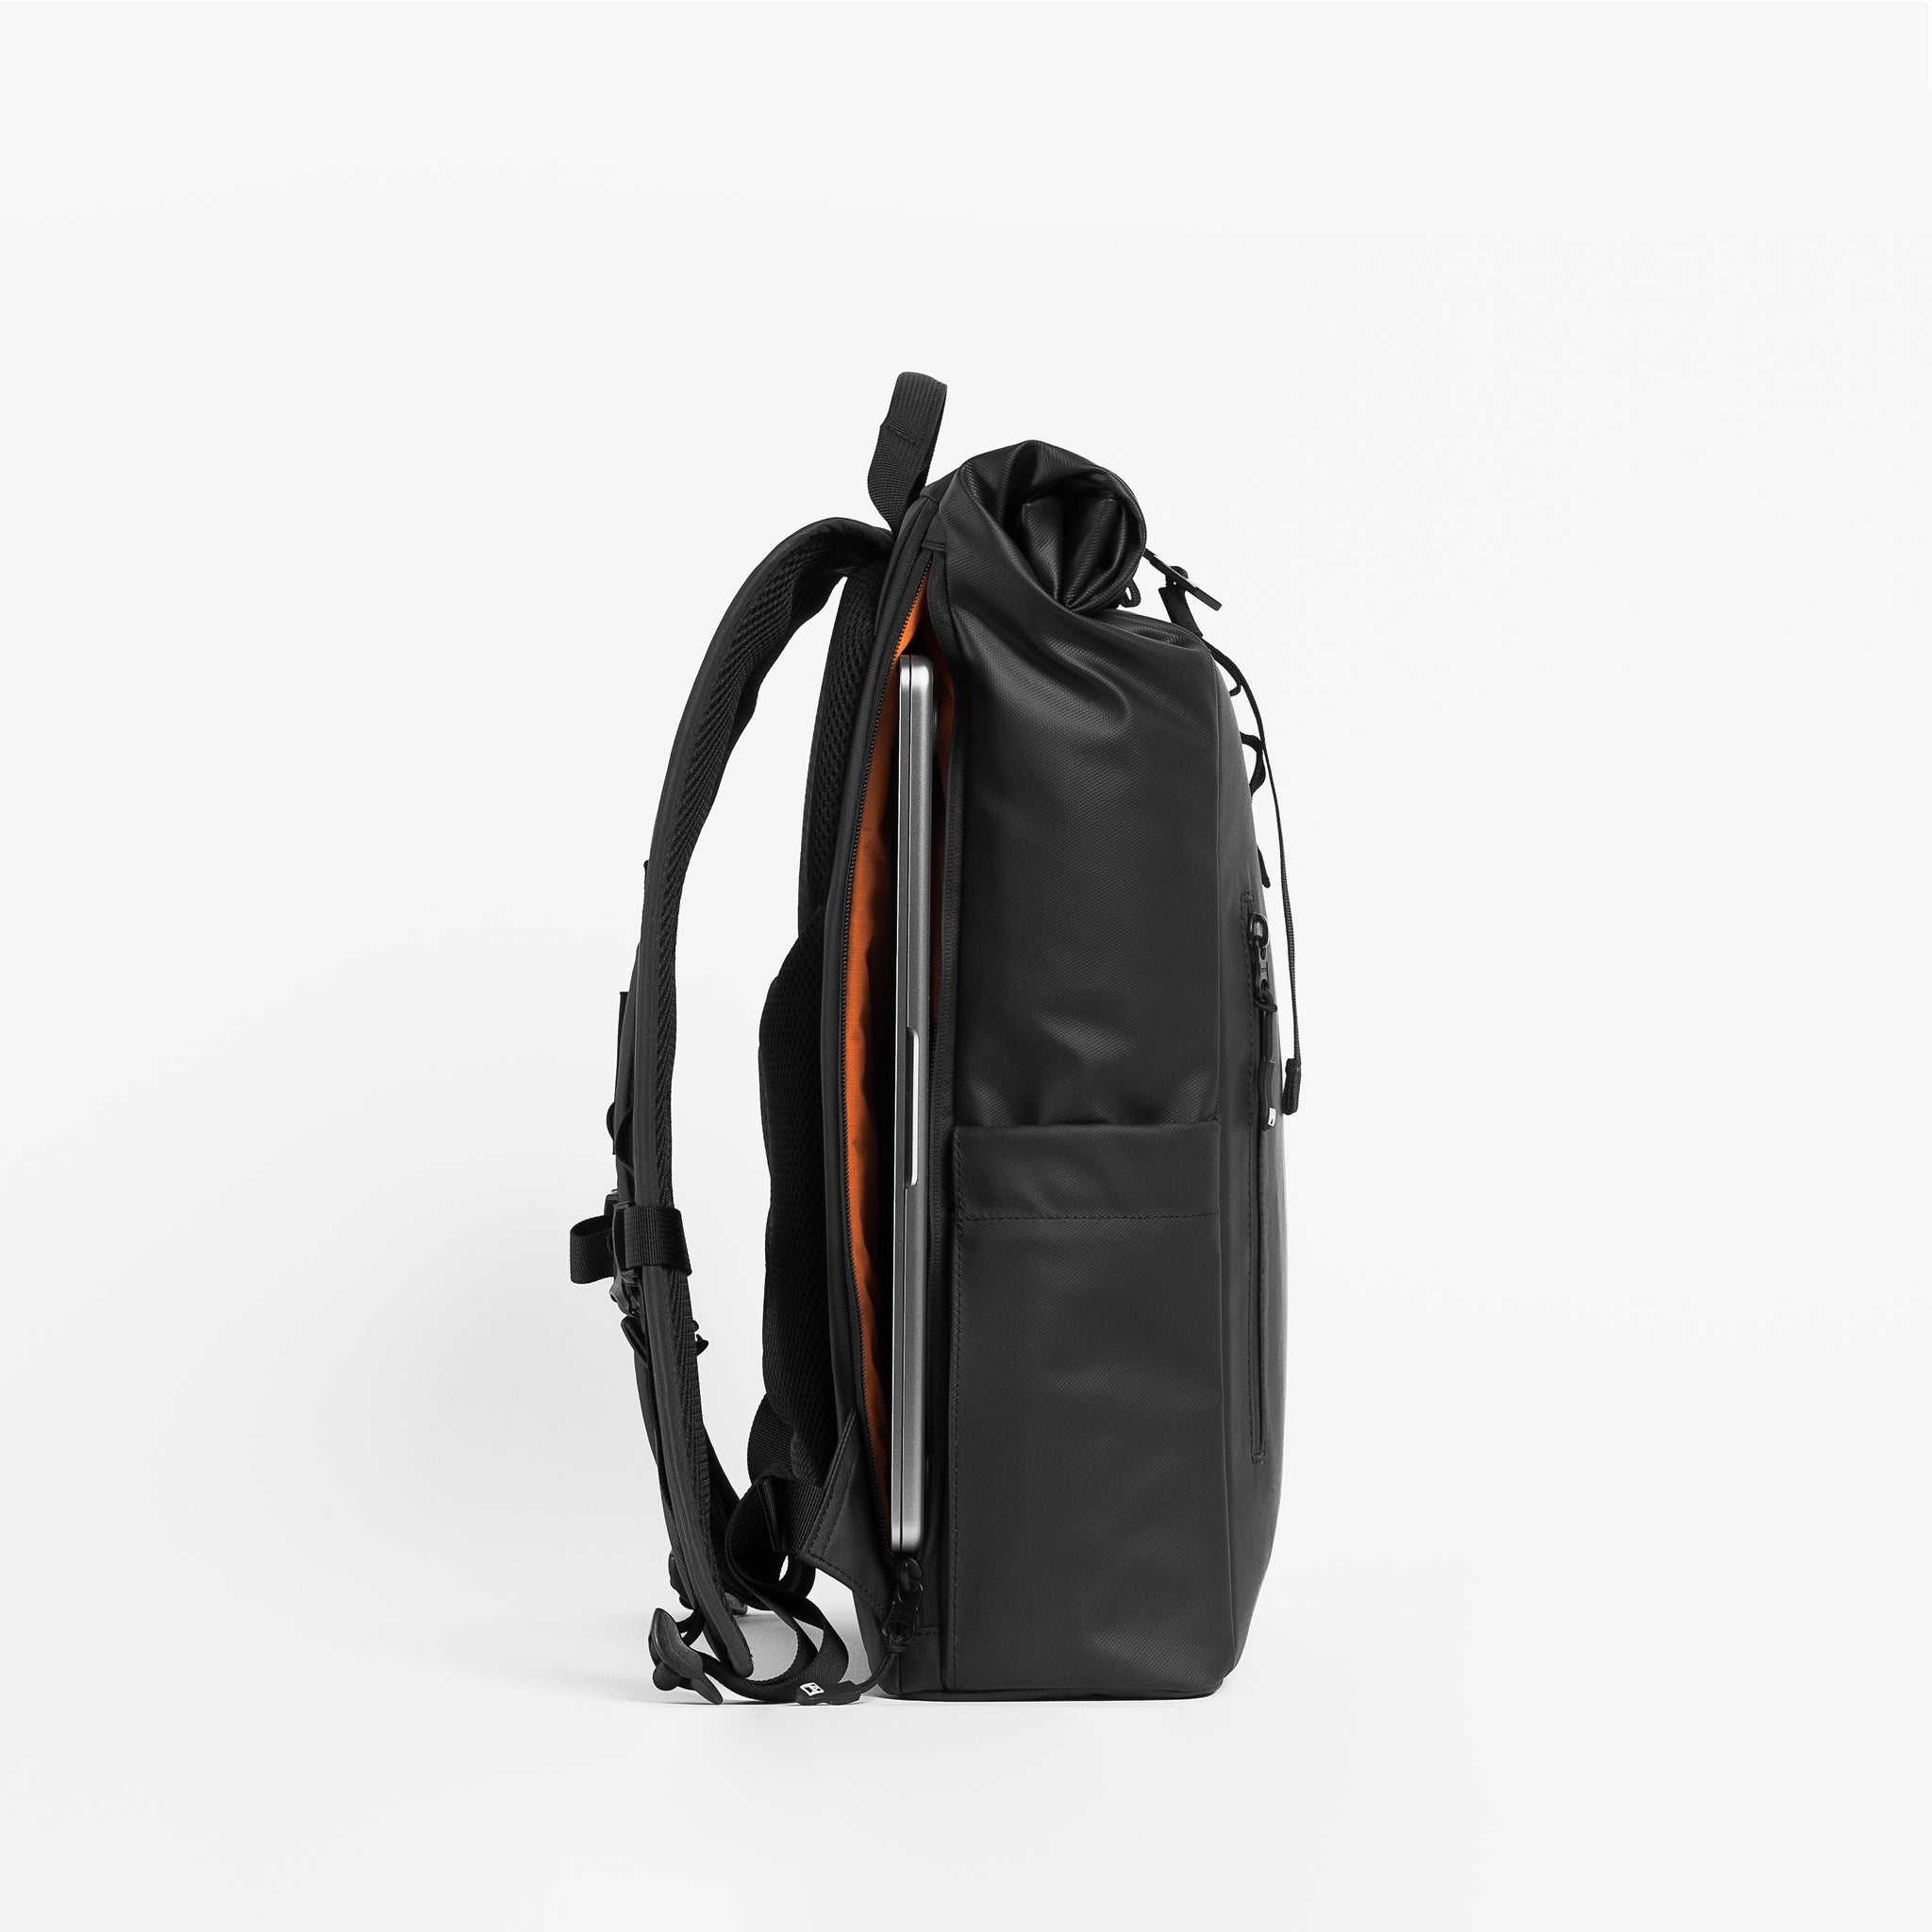 Side product shot of The Roll Top 15L in All Black with a latop in the unzipped laptop compartment.